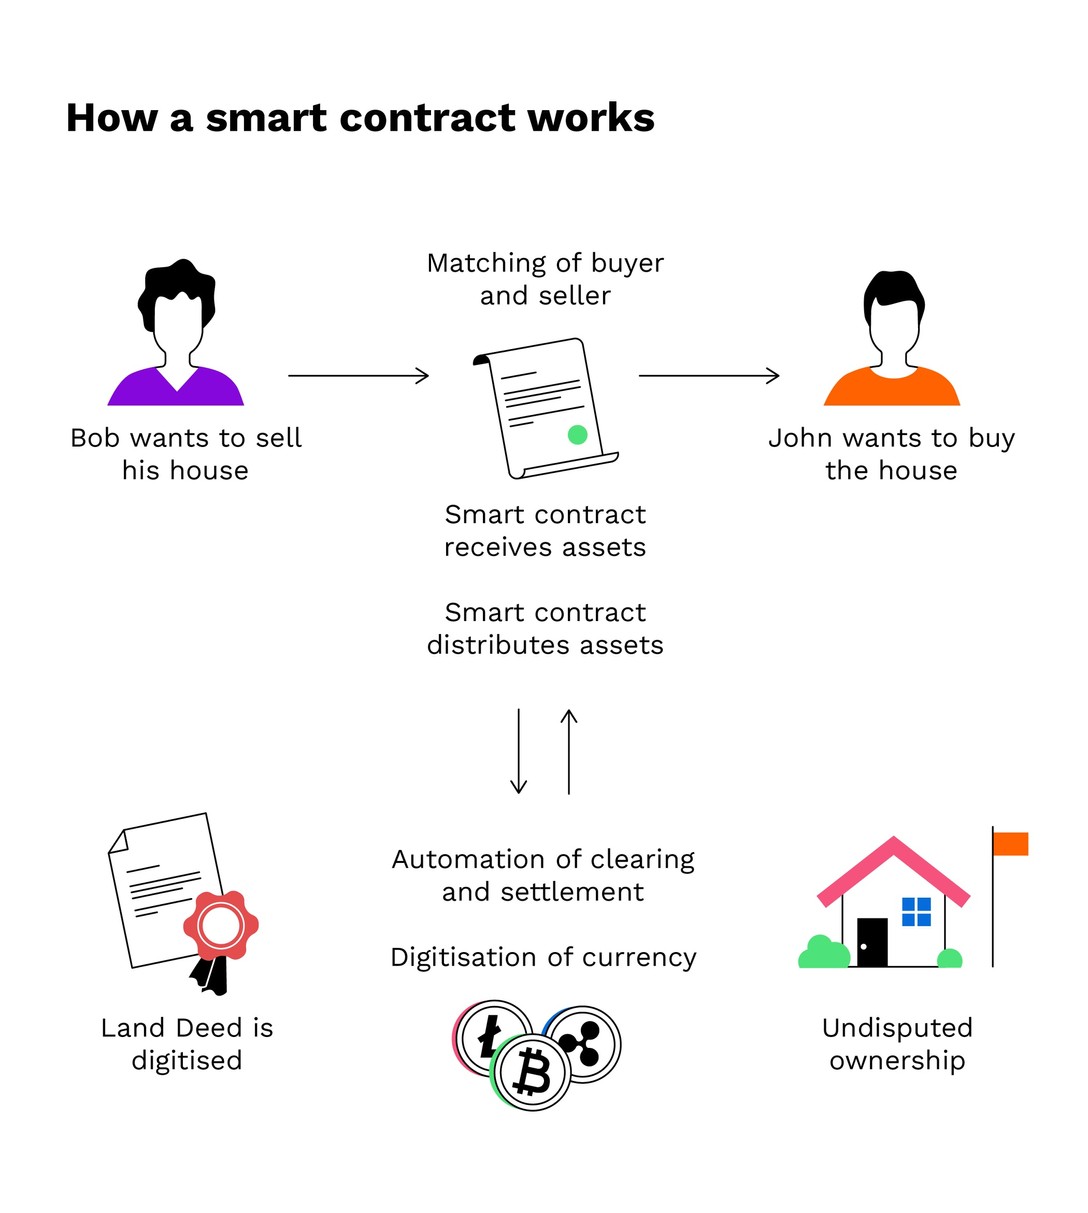 How do smart contracts work